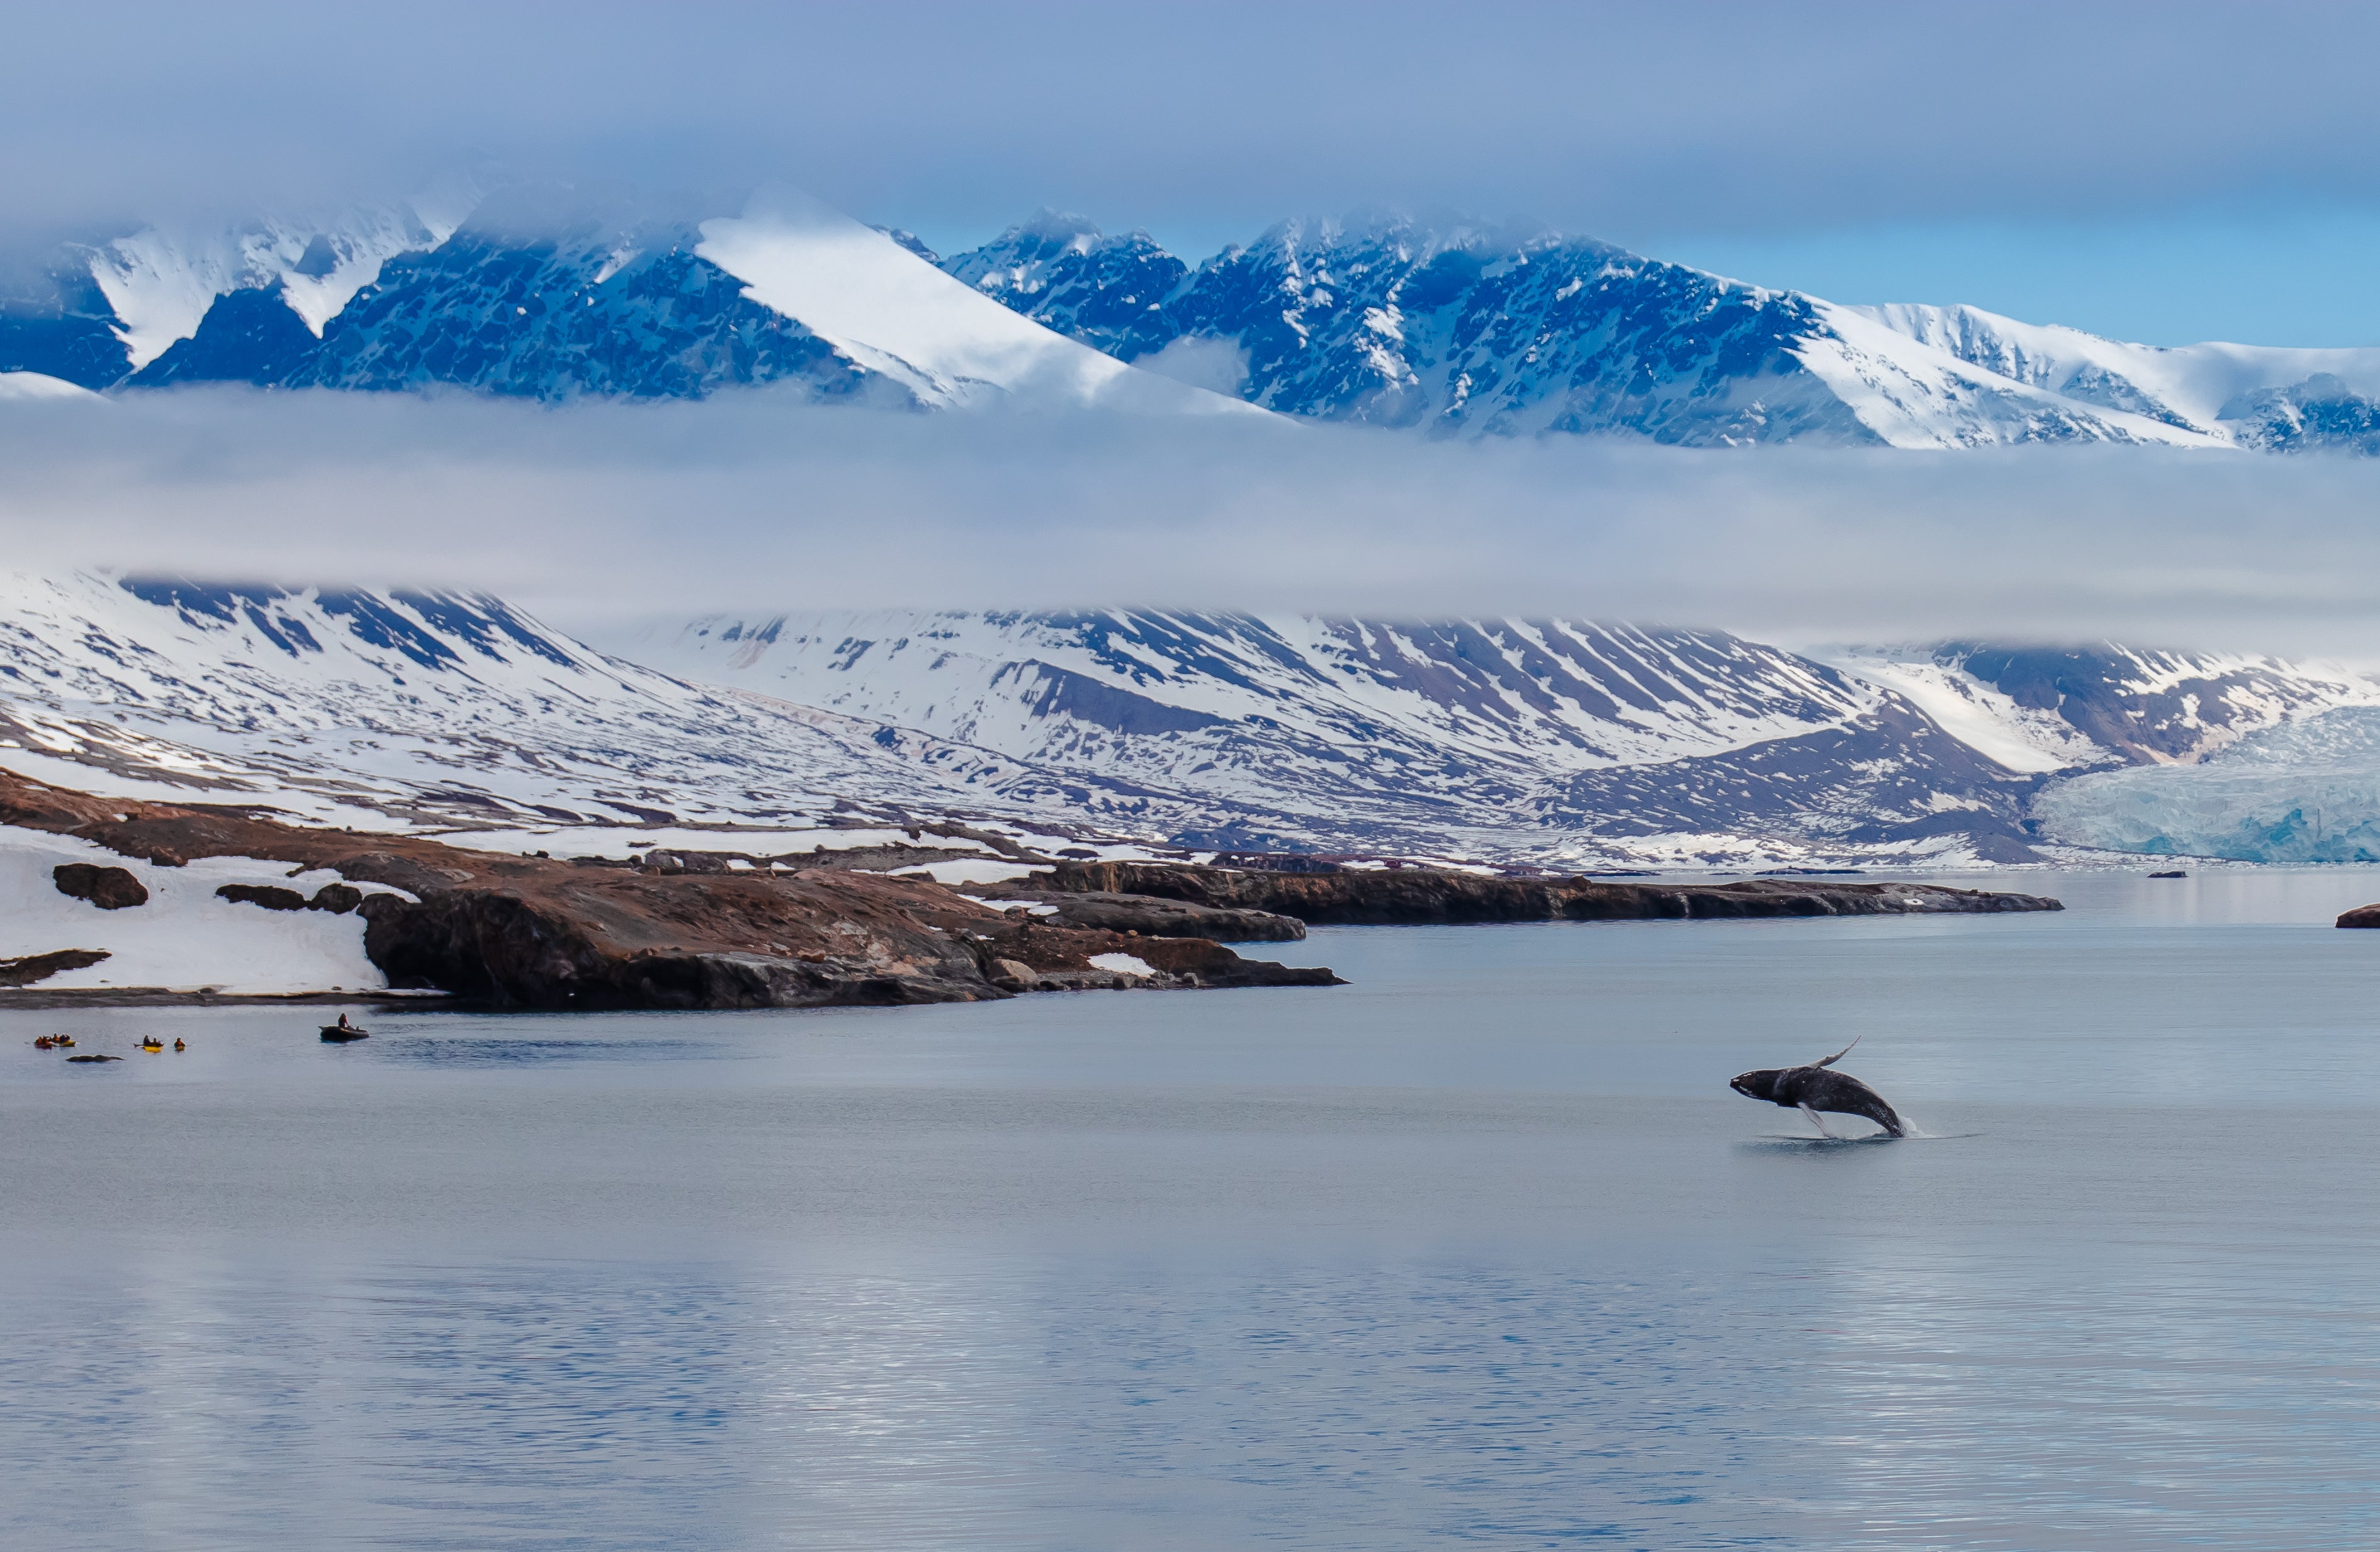 A killer whale chases herrings in the Arctic Circle